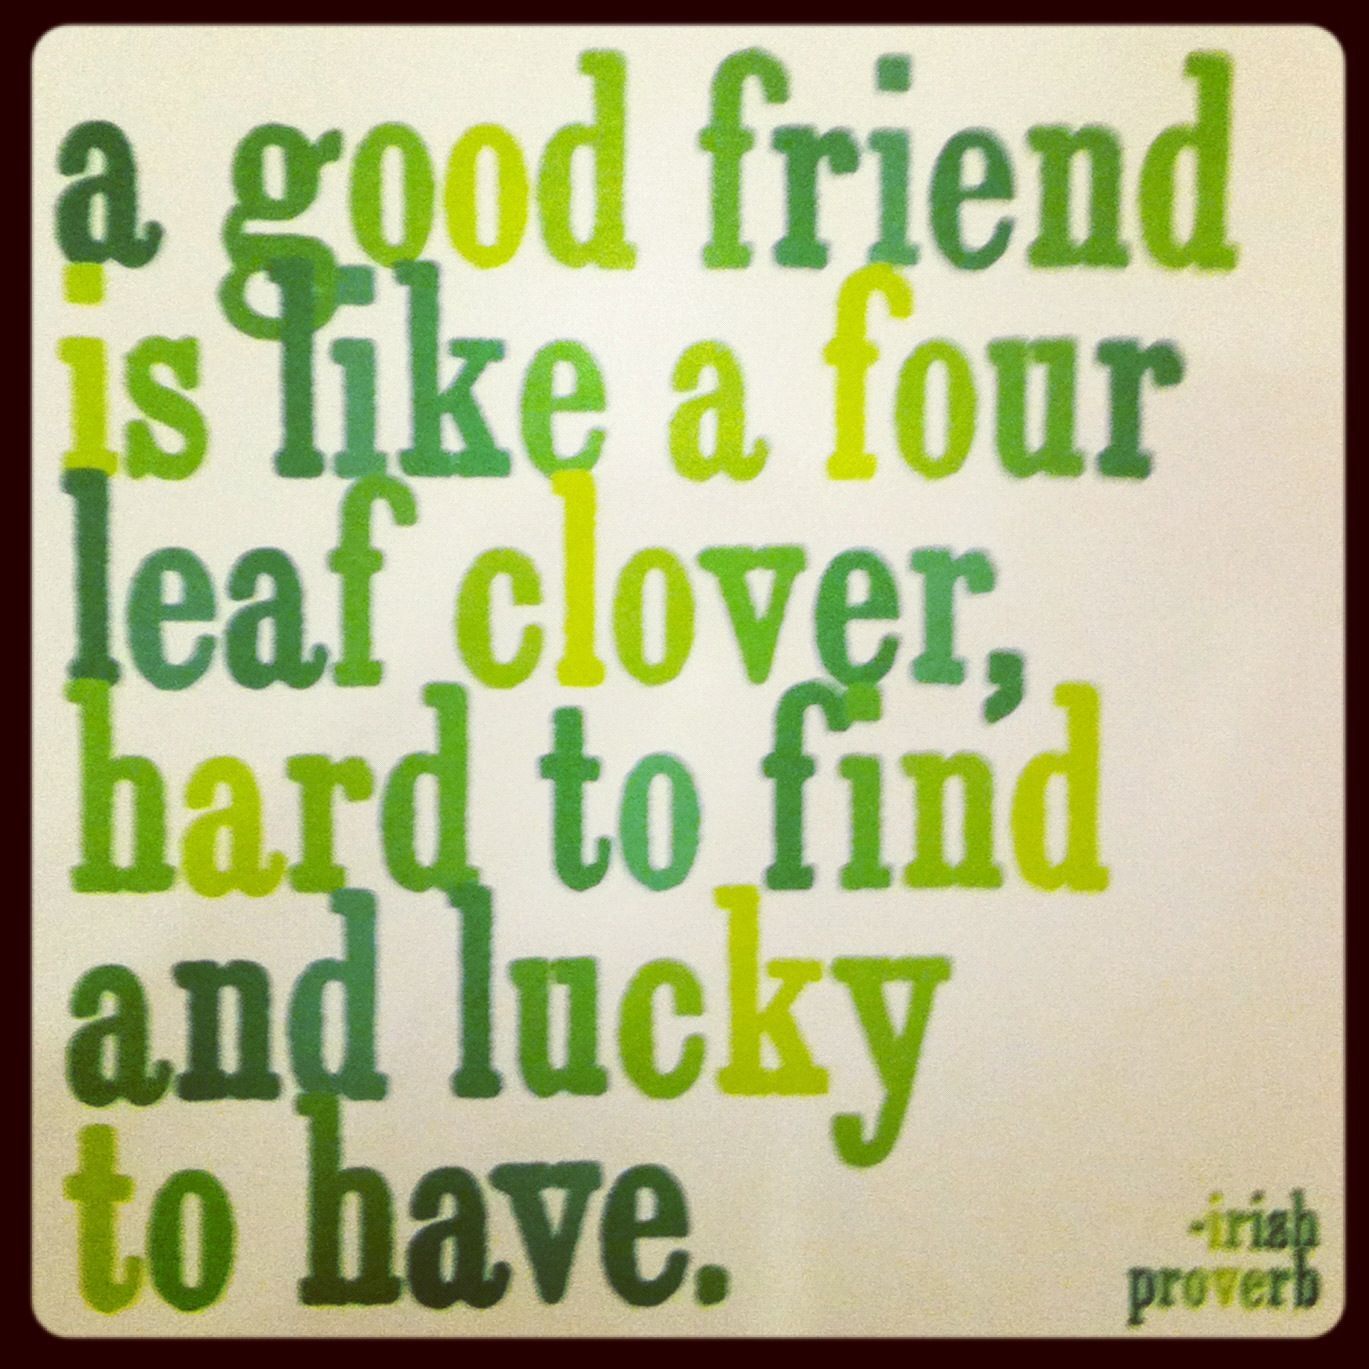 Quote On Good Friendship
 A Good Friend Is Like A Four Leaf Clover s